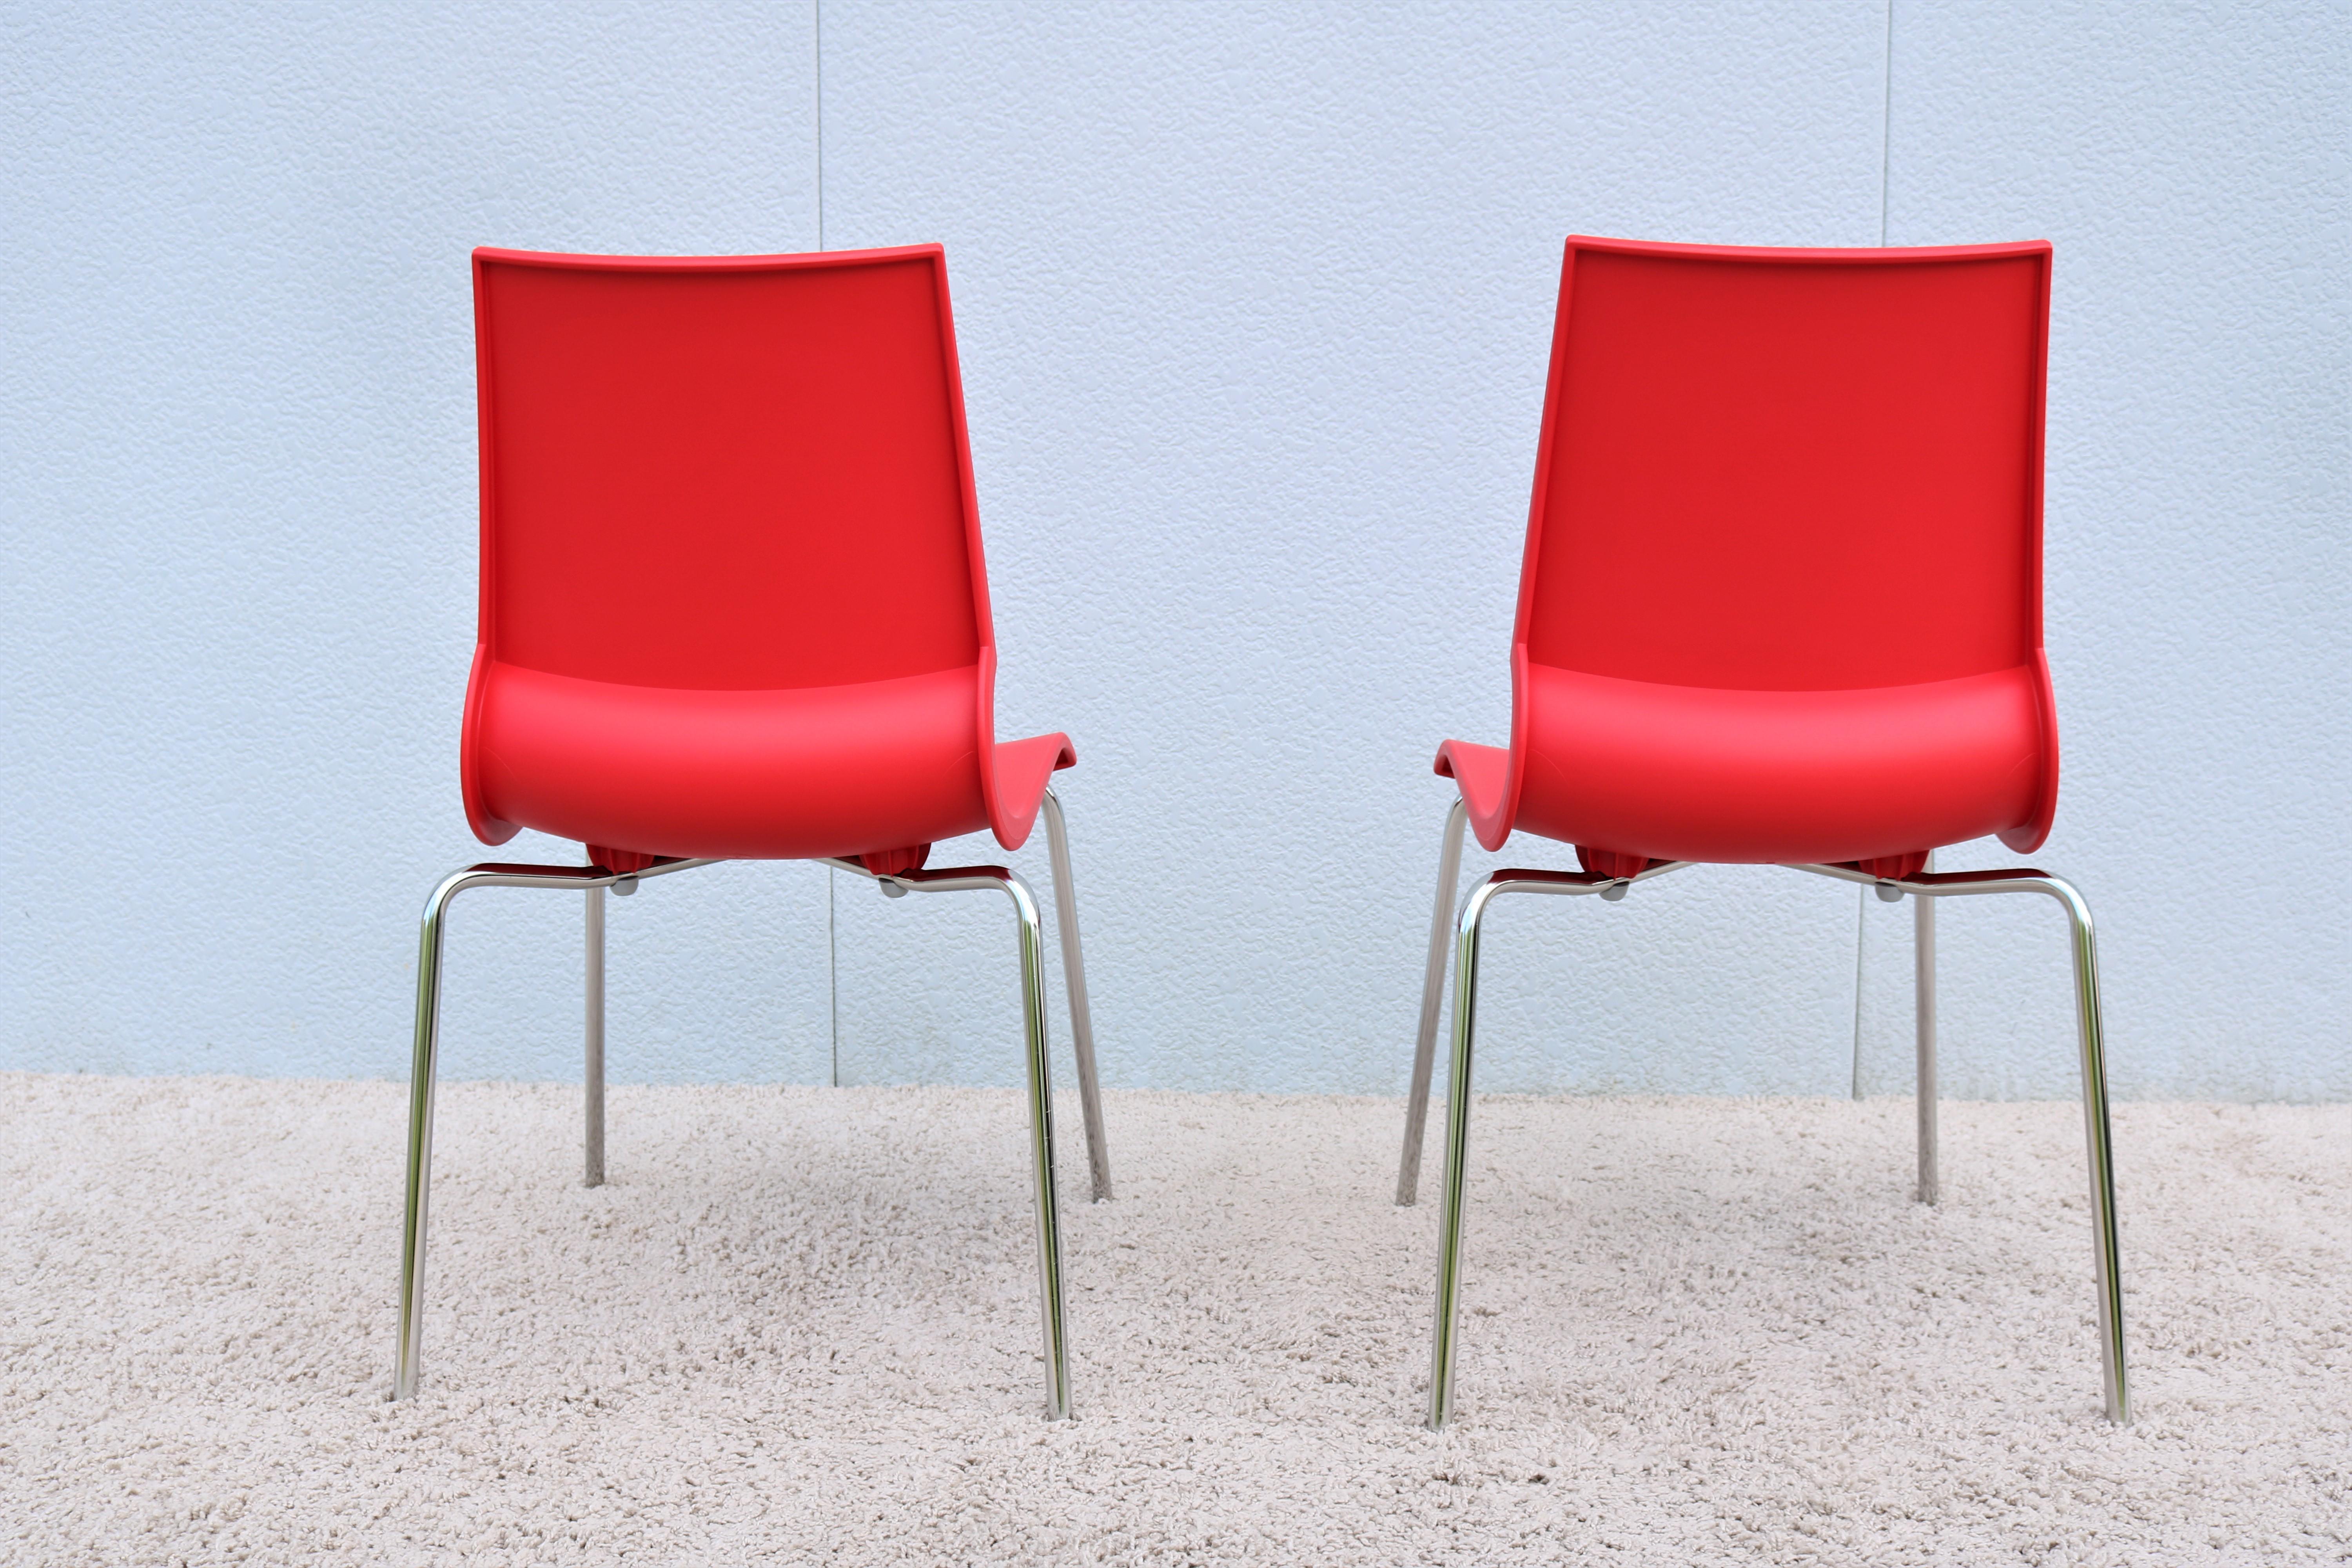 Modern Italia MarCo Maran for Maxdesign Red Ricciolina Dining Chairs, a Pair In Good Condition For Sale In Secaucus, NJ